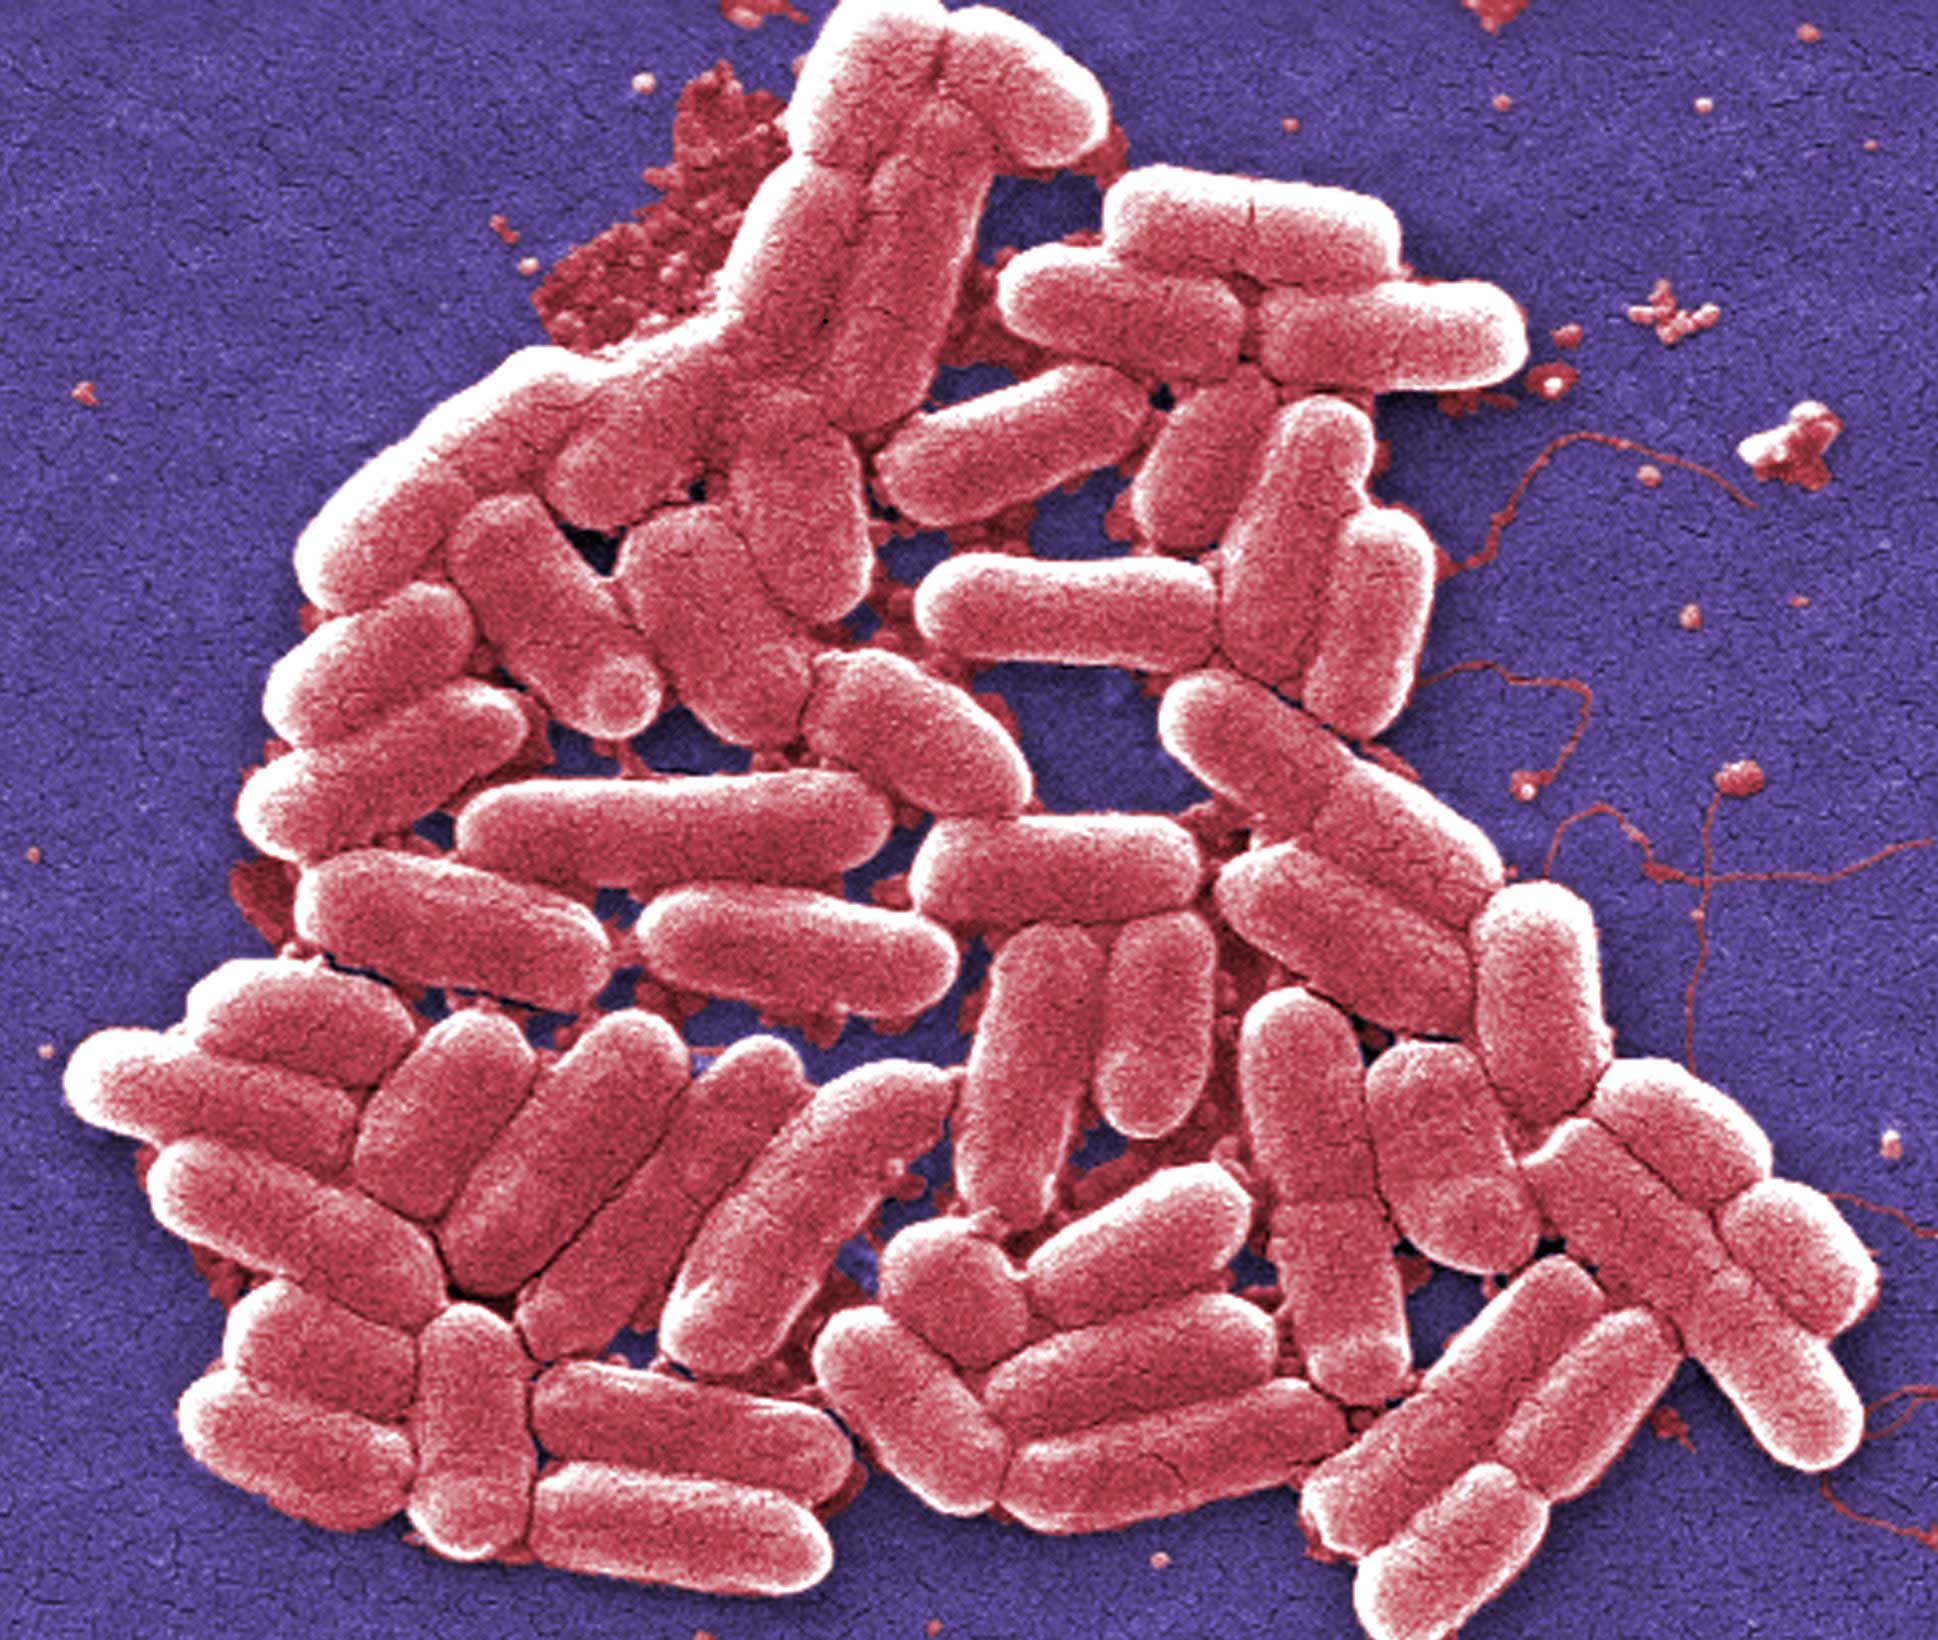 A group of bacteria